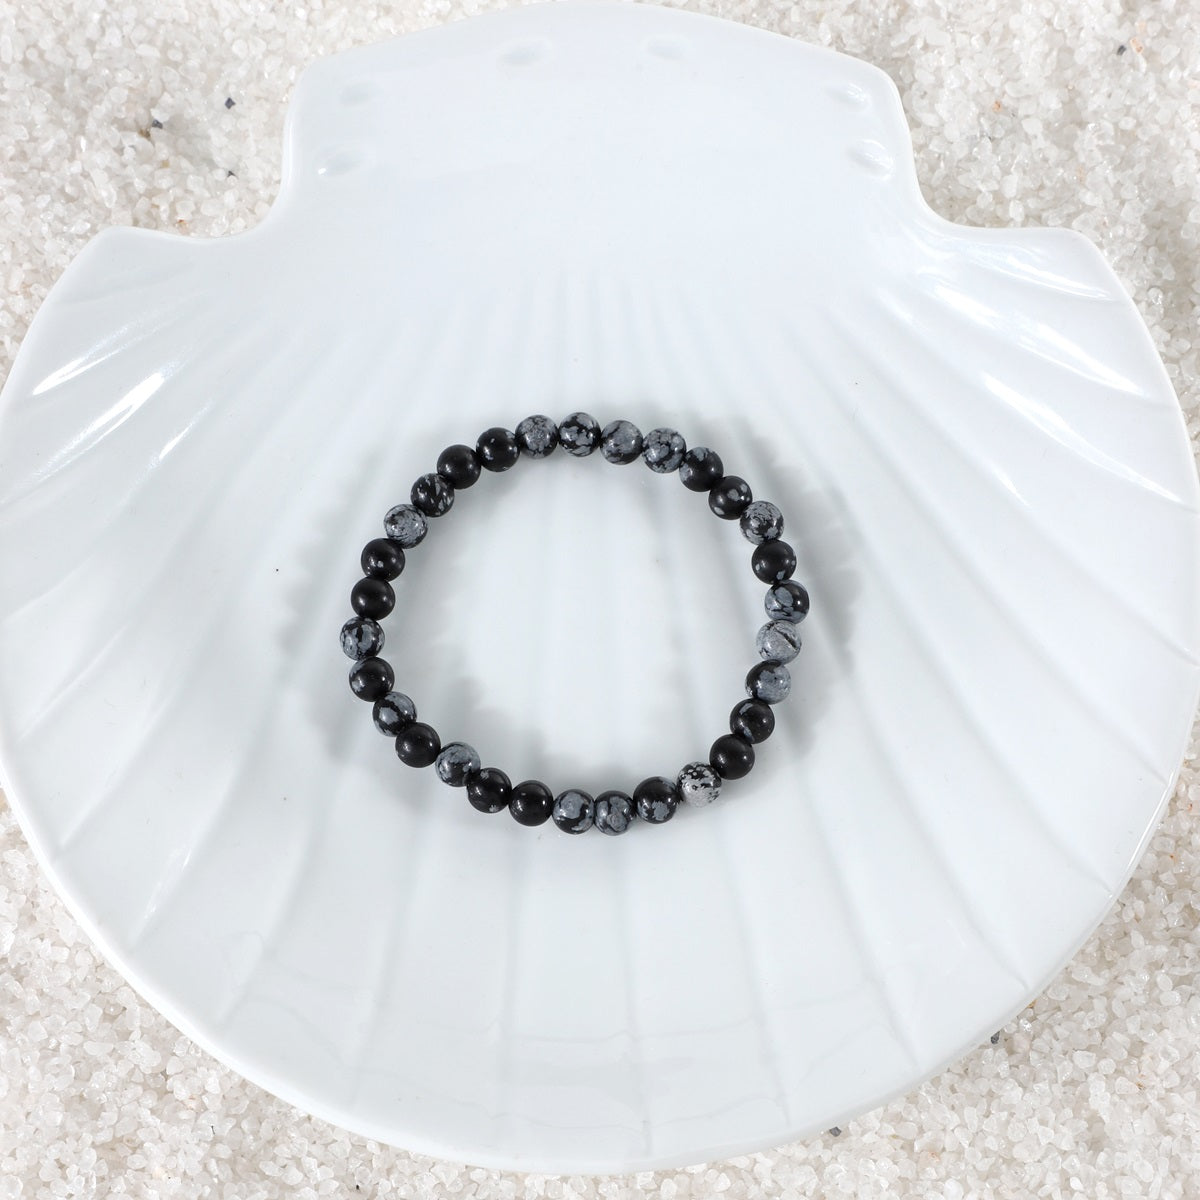 A captivating shot of the Snowflake Obsidian Bracelet in natural light, emphasizing its beauty and promoting a sense of equilibrium and focused composure.